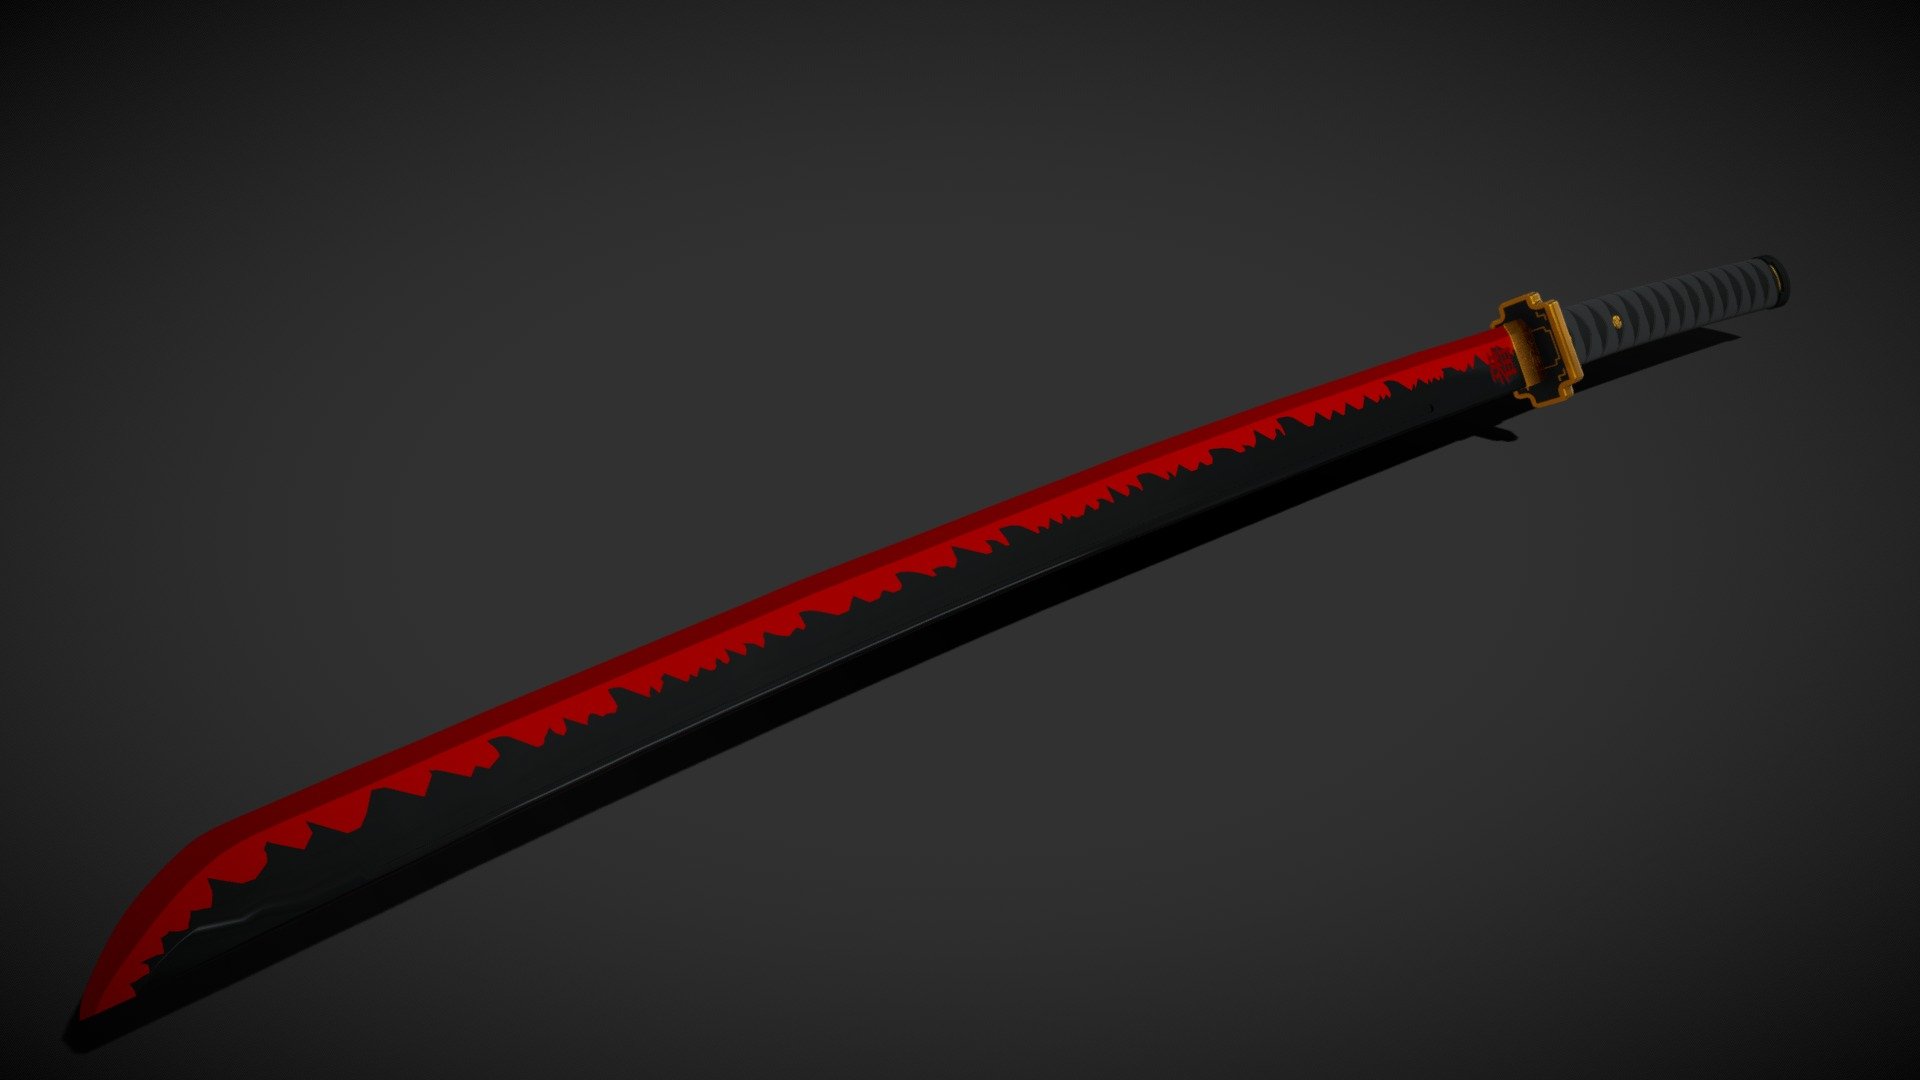 Quickly made this sword for practice inspired from demon slayer sword. And really should start to learn texuring&hellip; - Demon Slayer Themed Samurai sword - 3D model by Dylan (@DylanSpin) 3d model